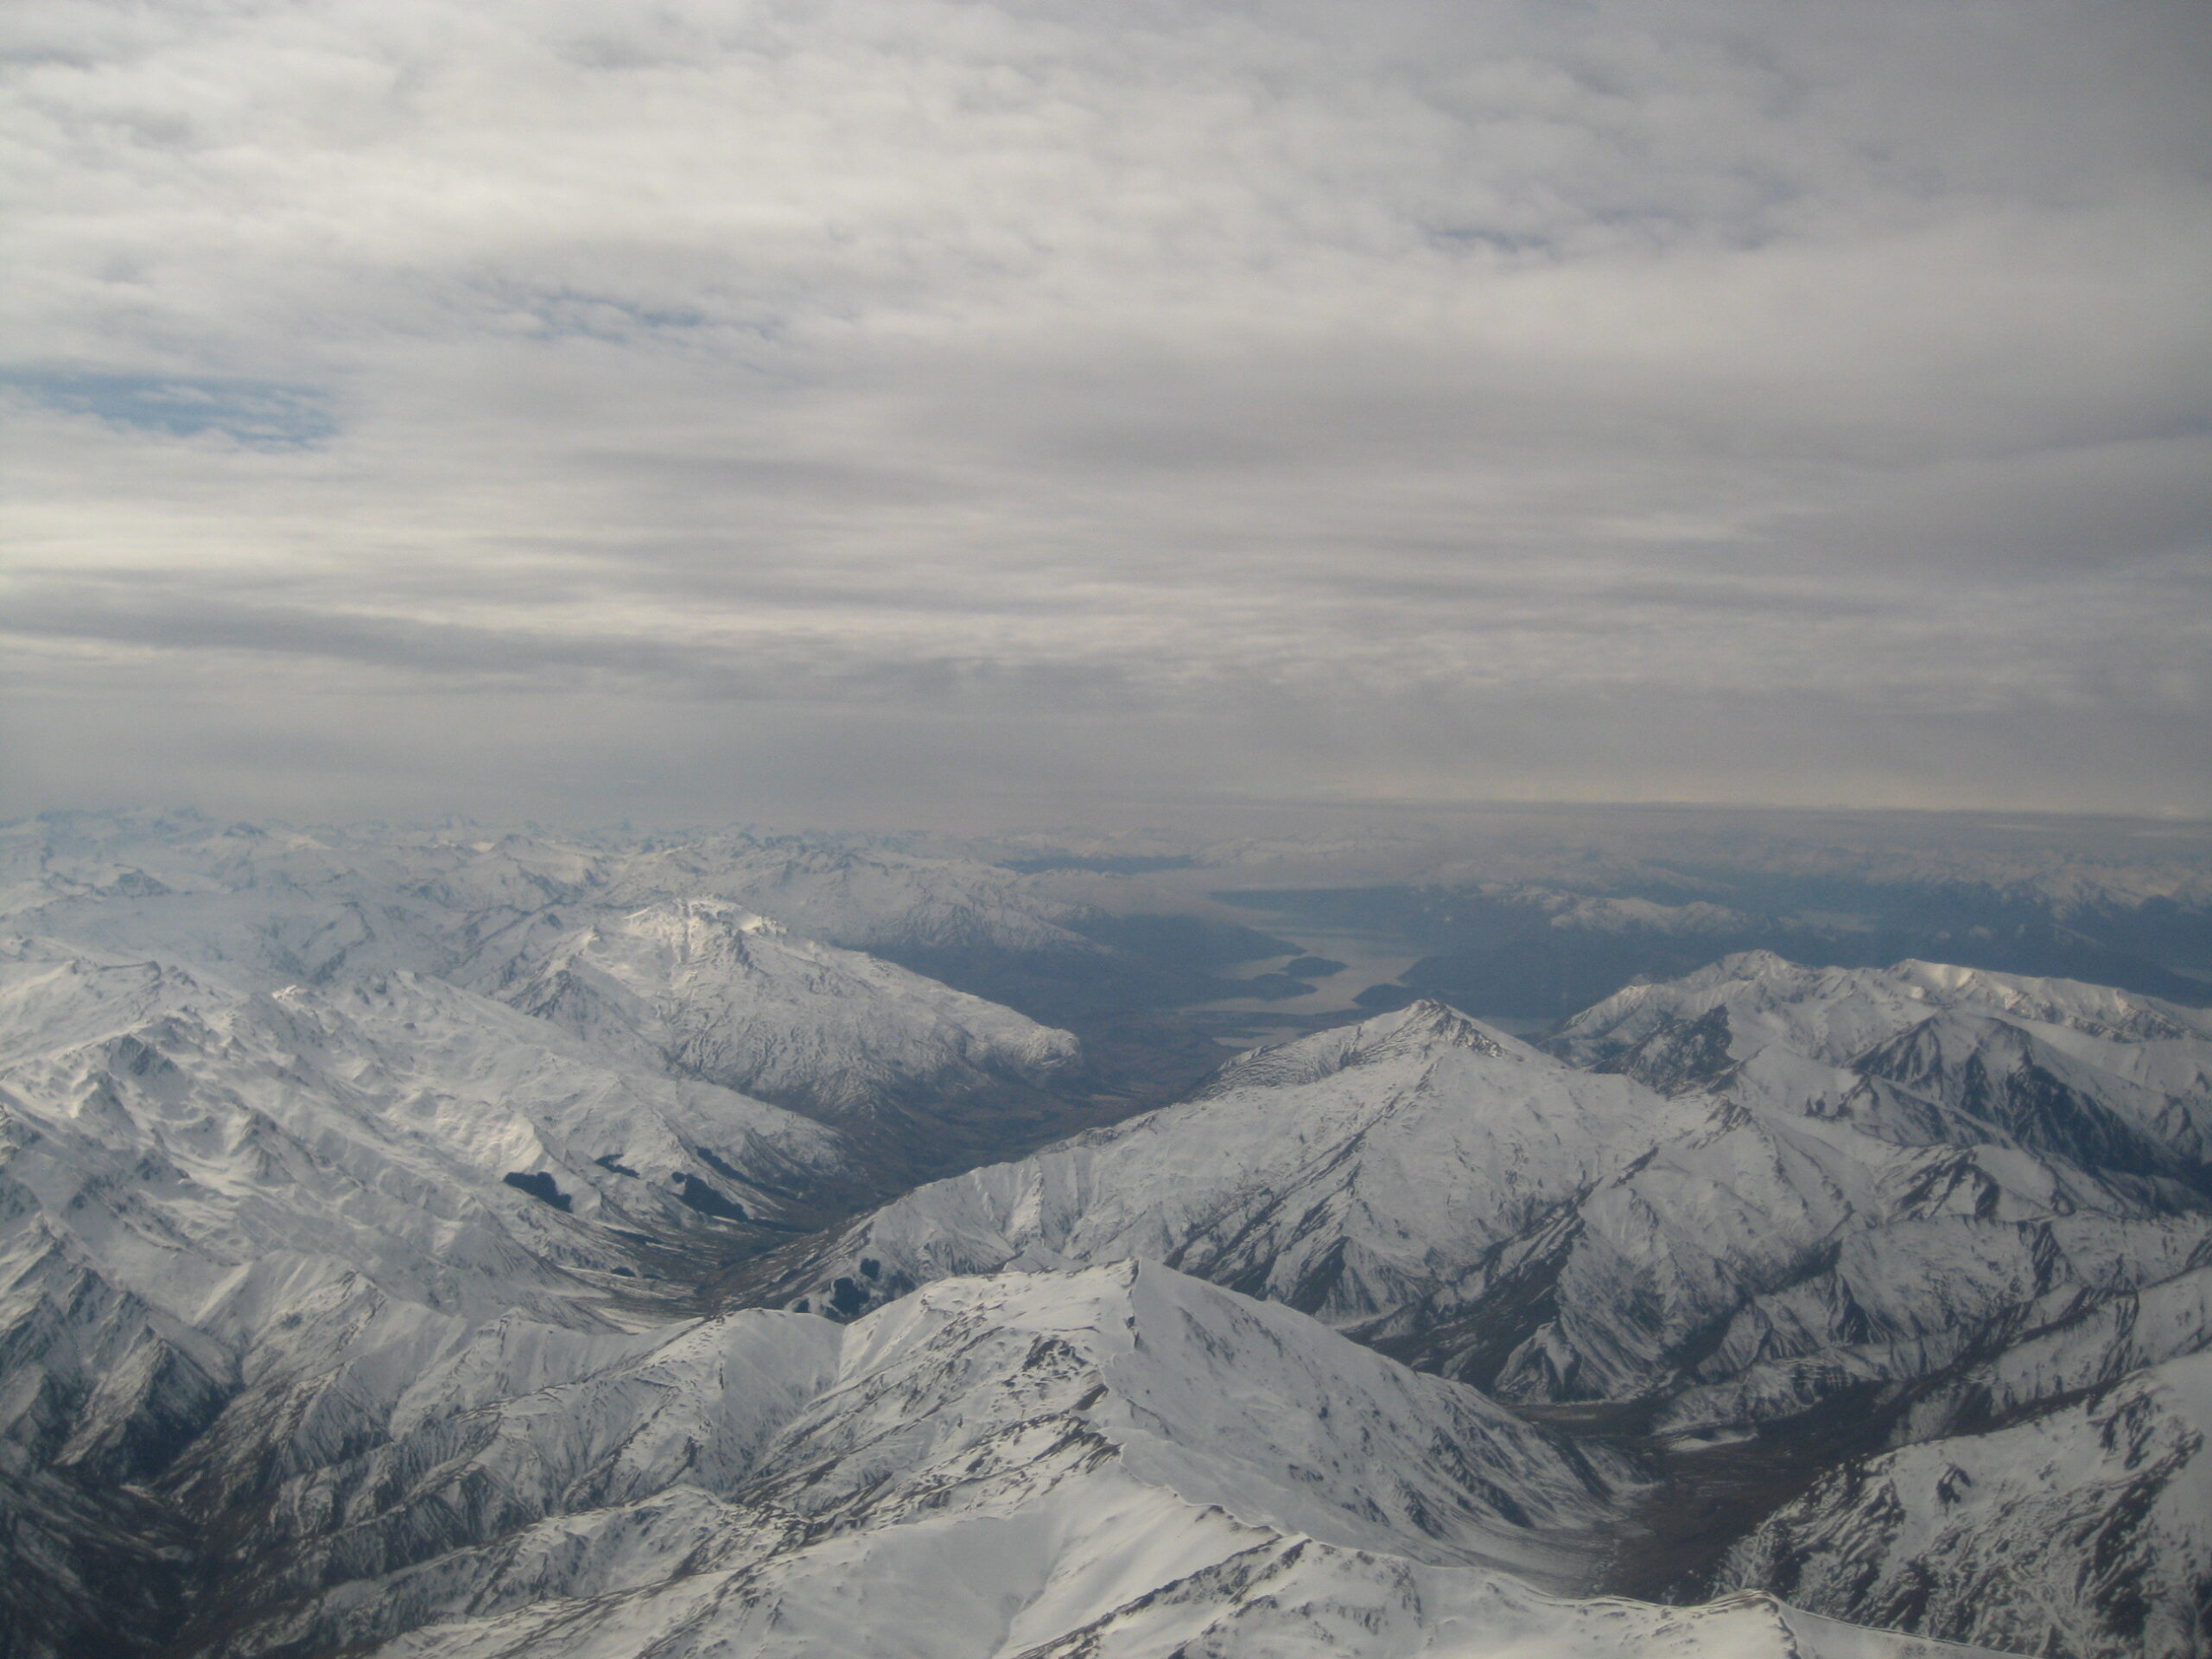 snow capped mountains from the air